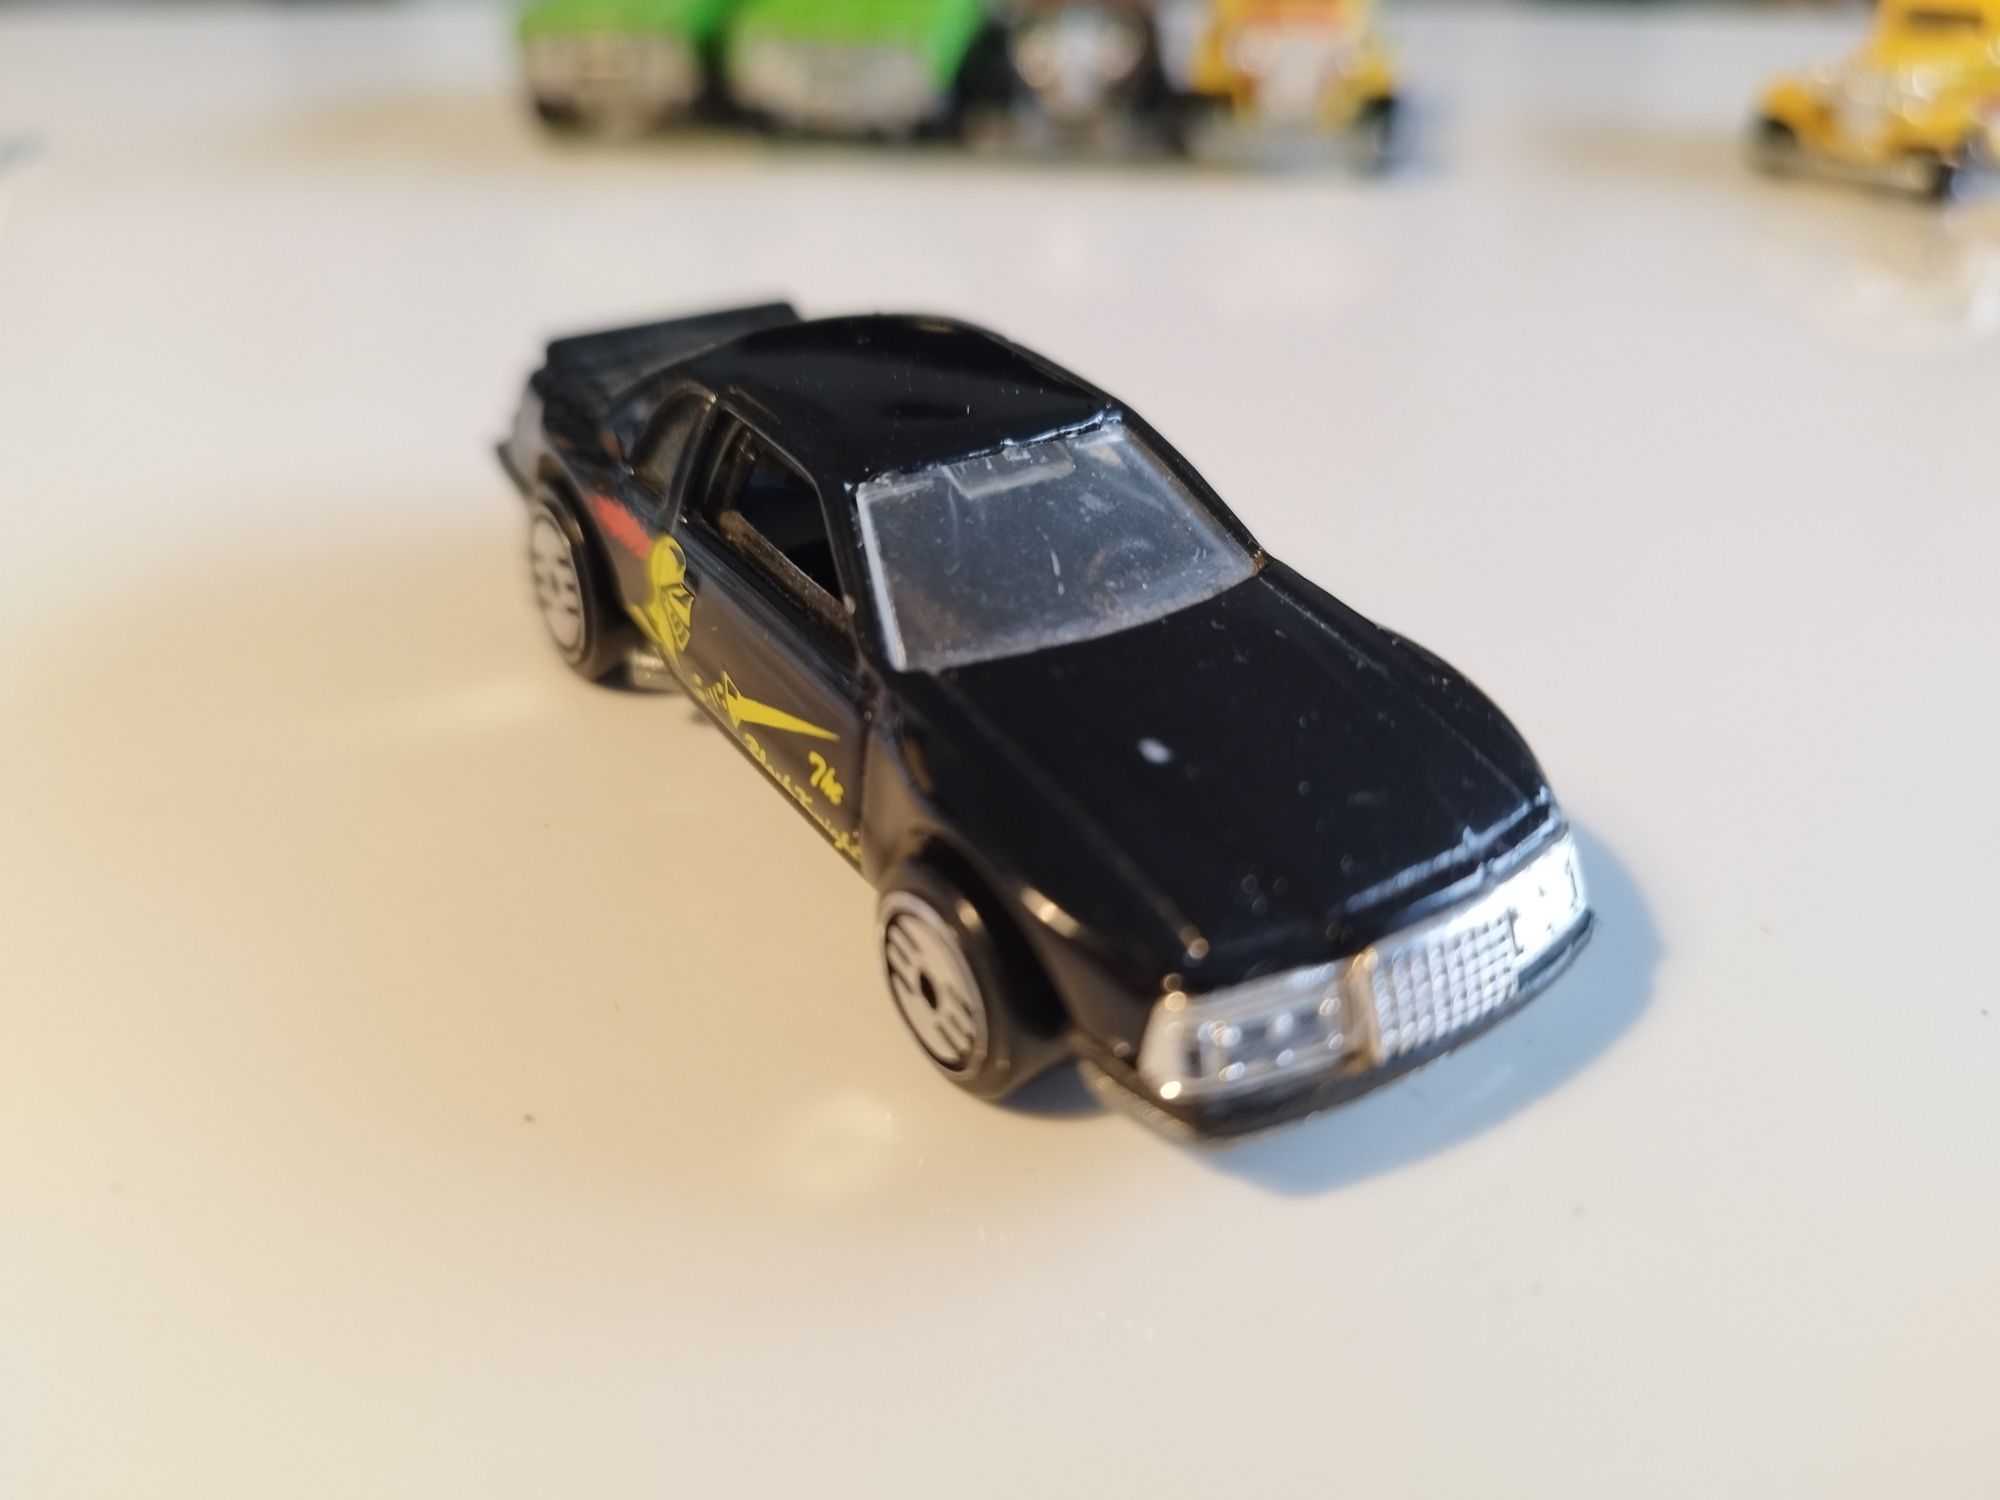 Hot Wheels Ford Mustang